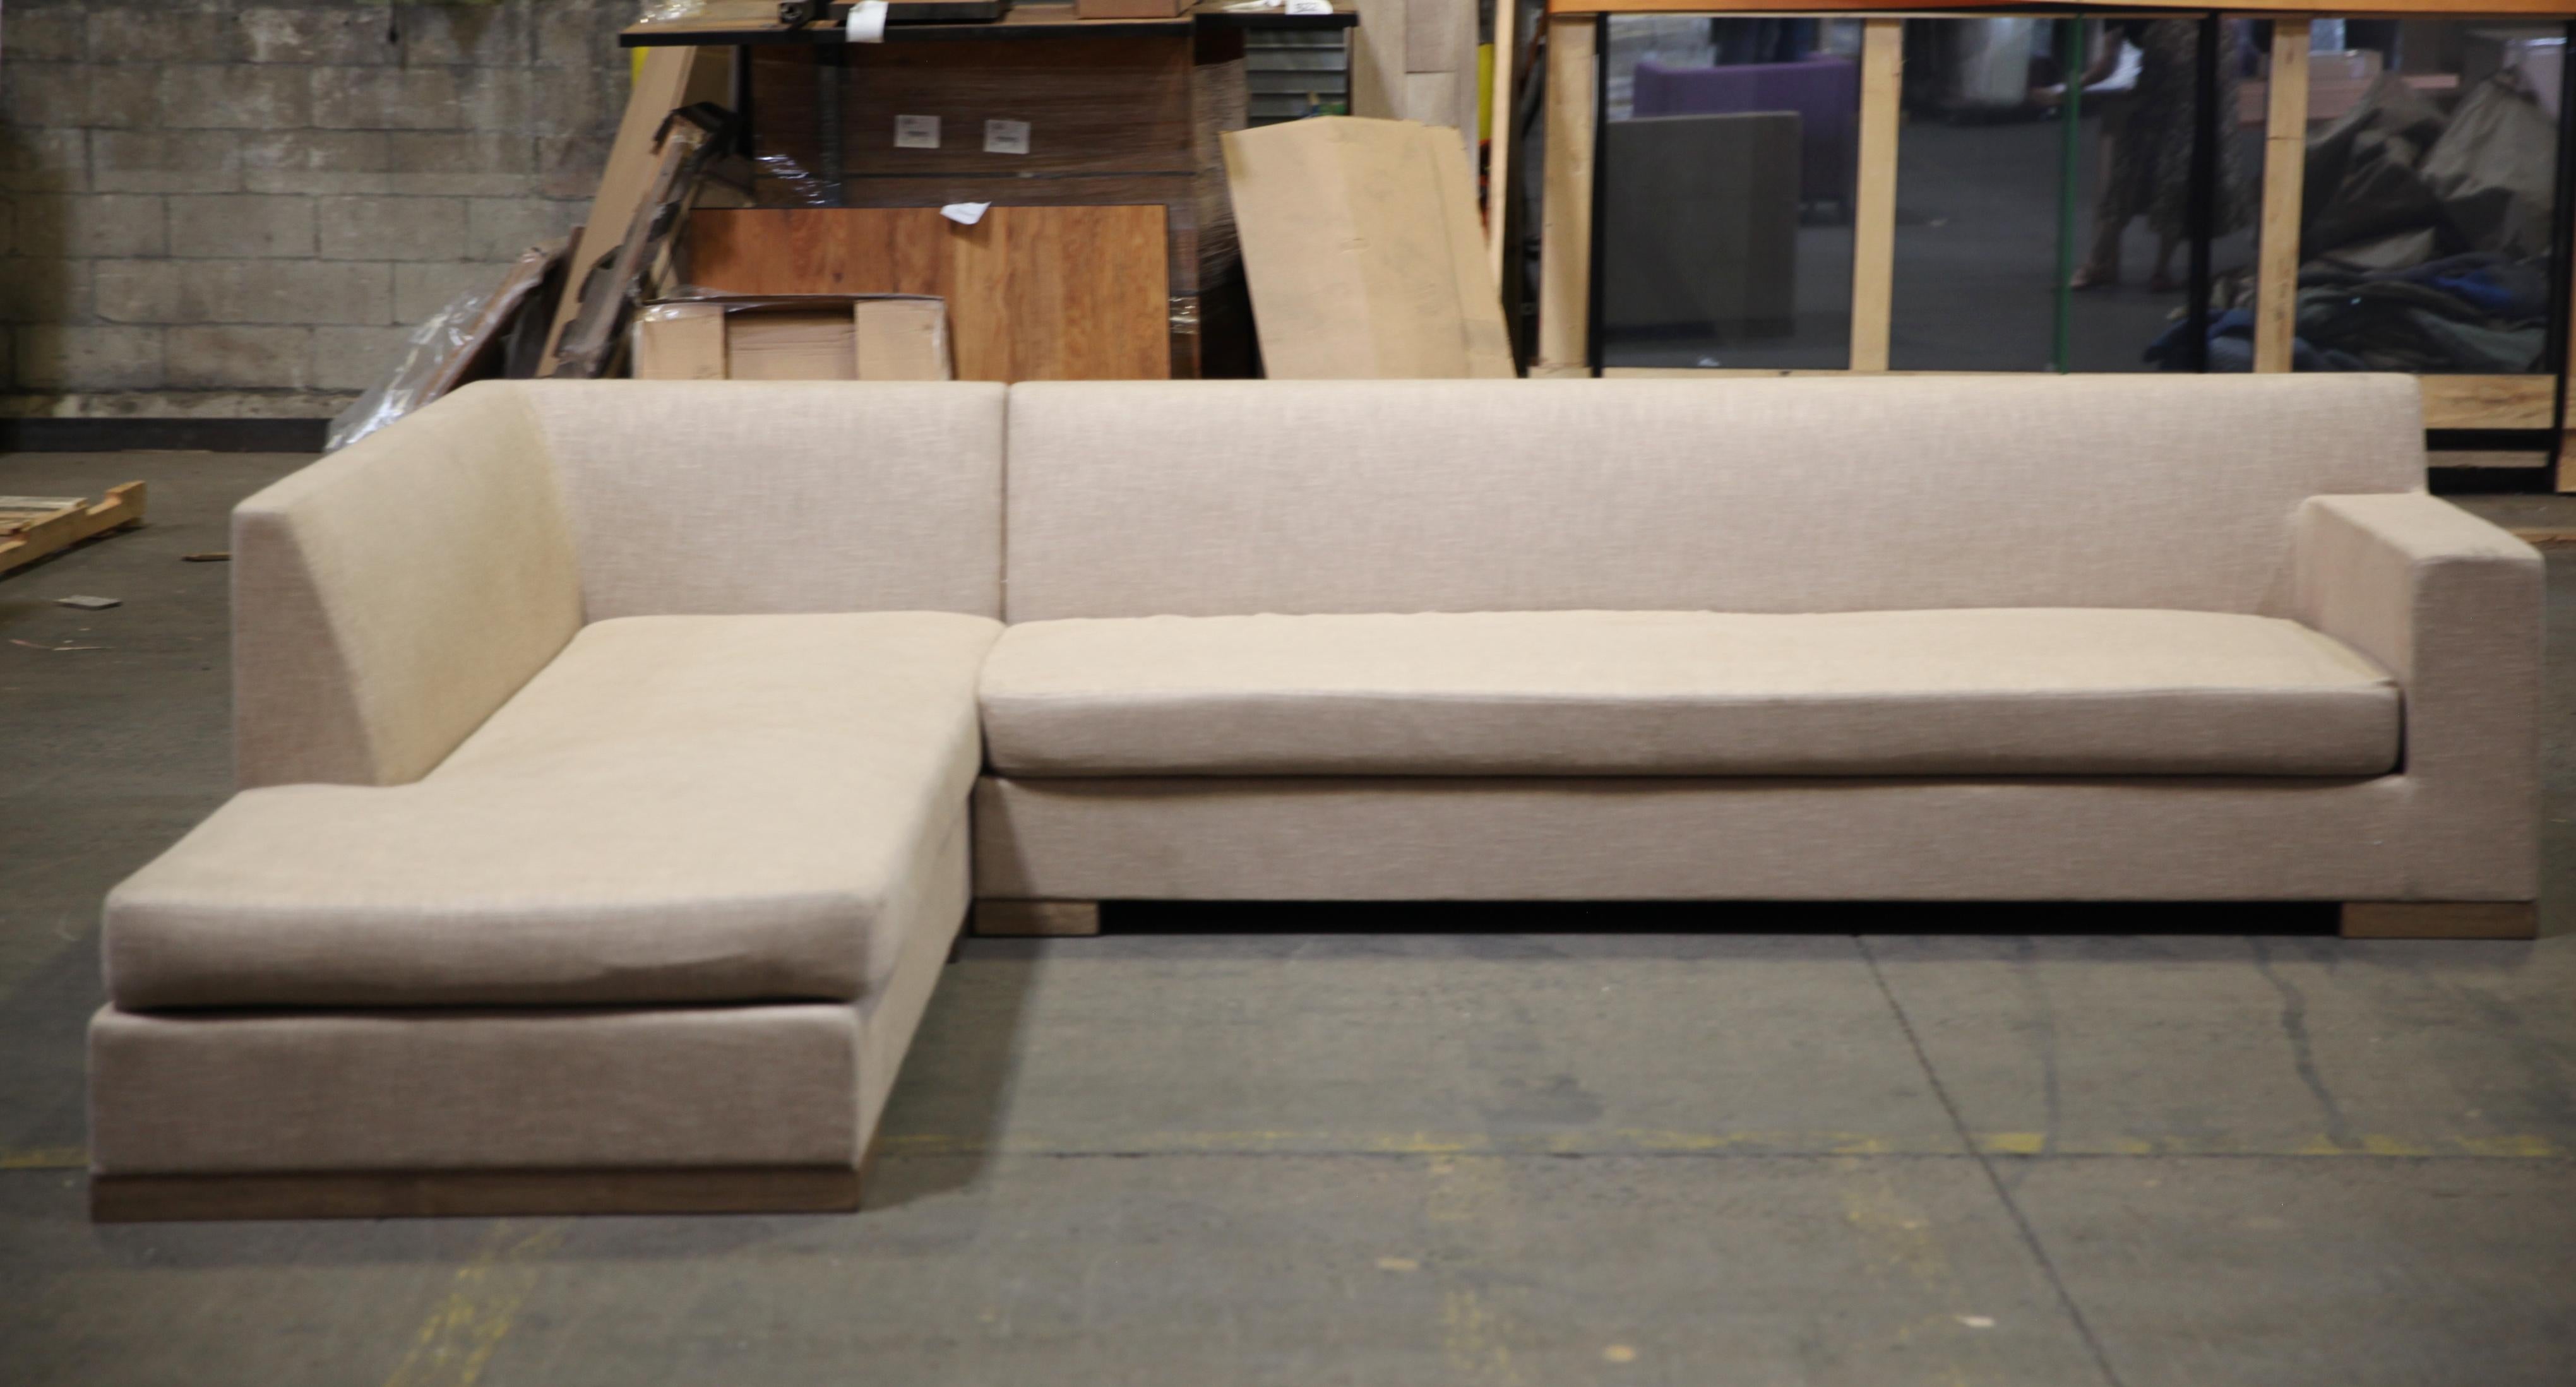 Modern Minimalist style large sectional sofa designed by Ideo. The piece comes in two sections, one with an ottoman side. Accompanied by a set of nine throw pillows, this sectional sofa is in great vintage condition with age-appropriate wear and use